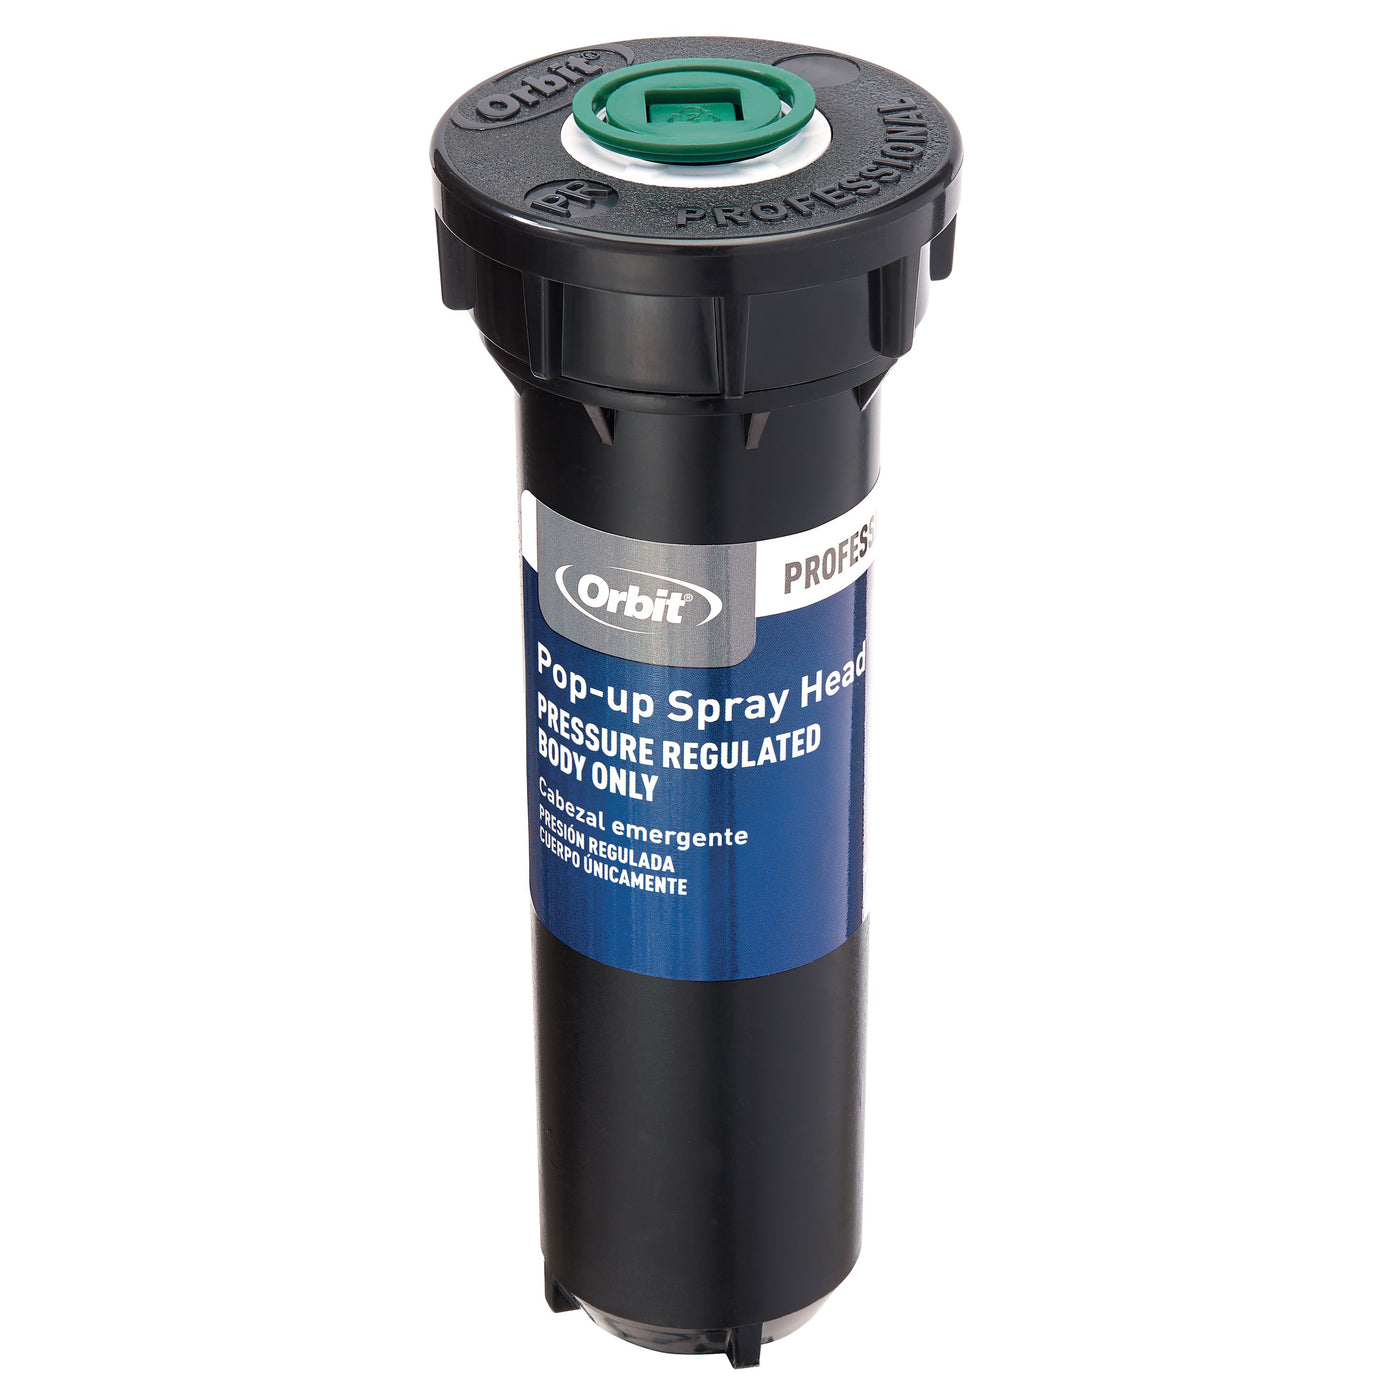 4 inch Professional Series 30/40 PSI Pressure Regulated Spray Head with Flush Cap - Model number 80361.